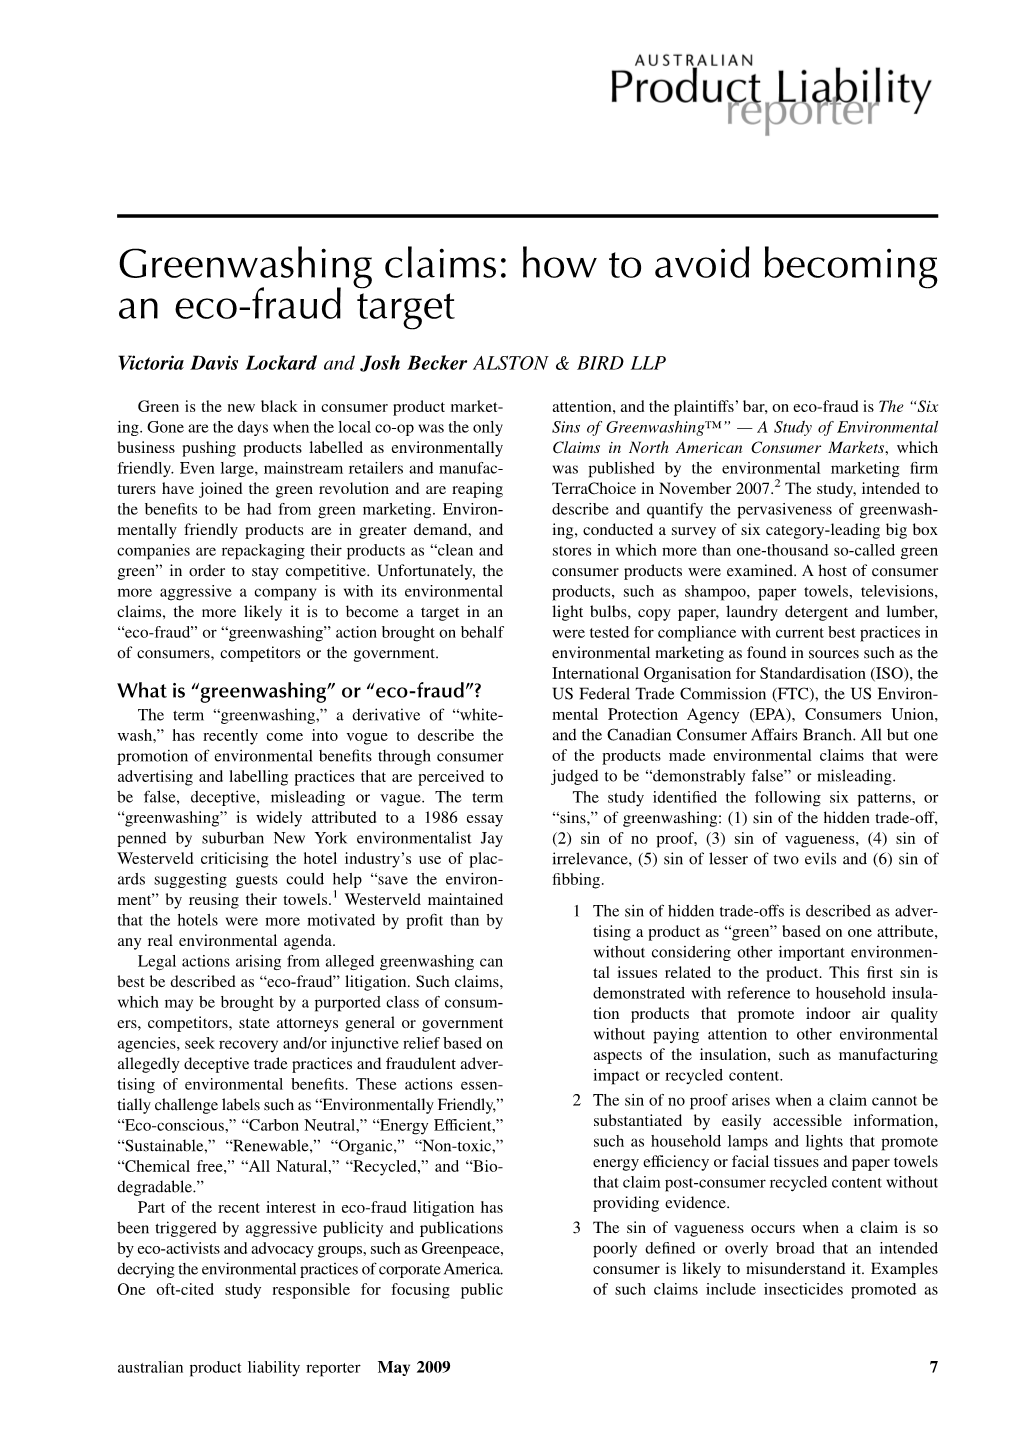 Greenwashing Claims: How to Avoid Becoming an Eco-Fraud Target